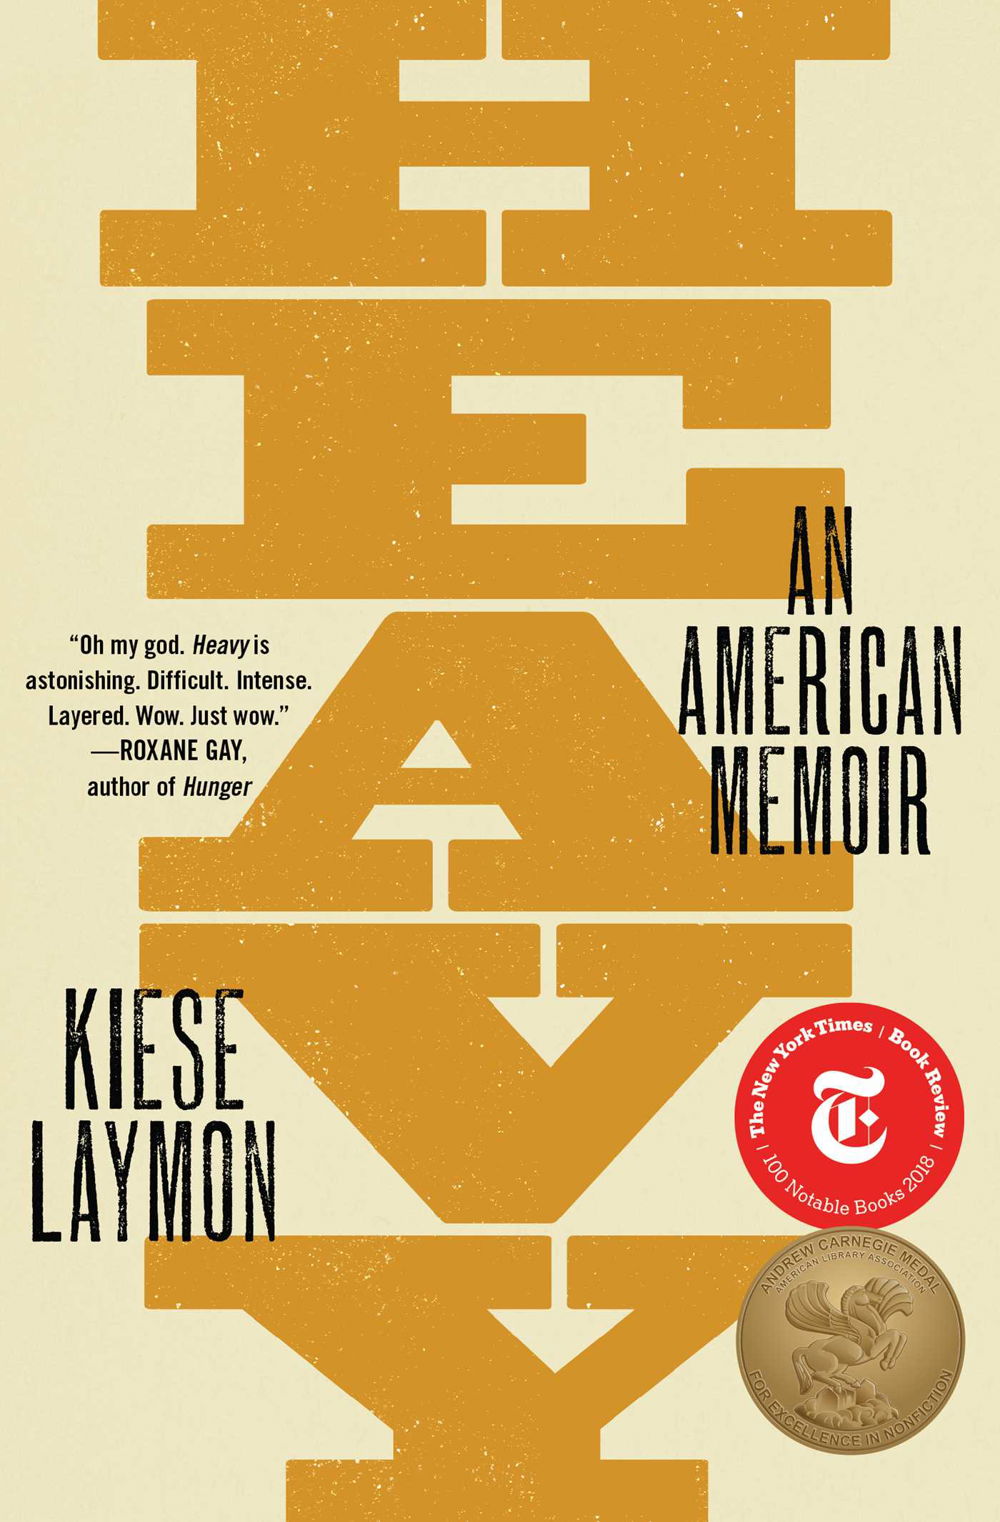 A book cover with the word "Heavy" written in a wide, serif font vertically down the center in a mustard yellow. Black text says "Kiese LAymon" and "An American memoir." Medallions on the cover identify the book as.a New York Times Book Review 100 Notable Books 2018 and Andrew Carnegie Medal for Excellence in Nonfiction.